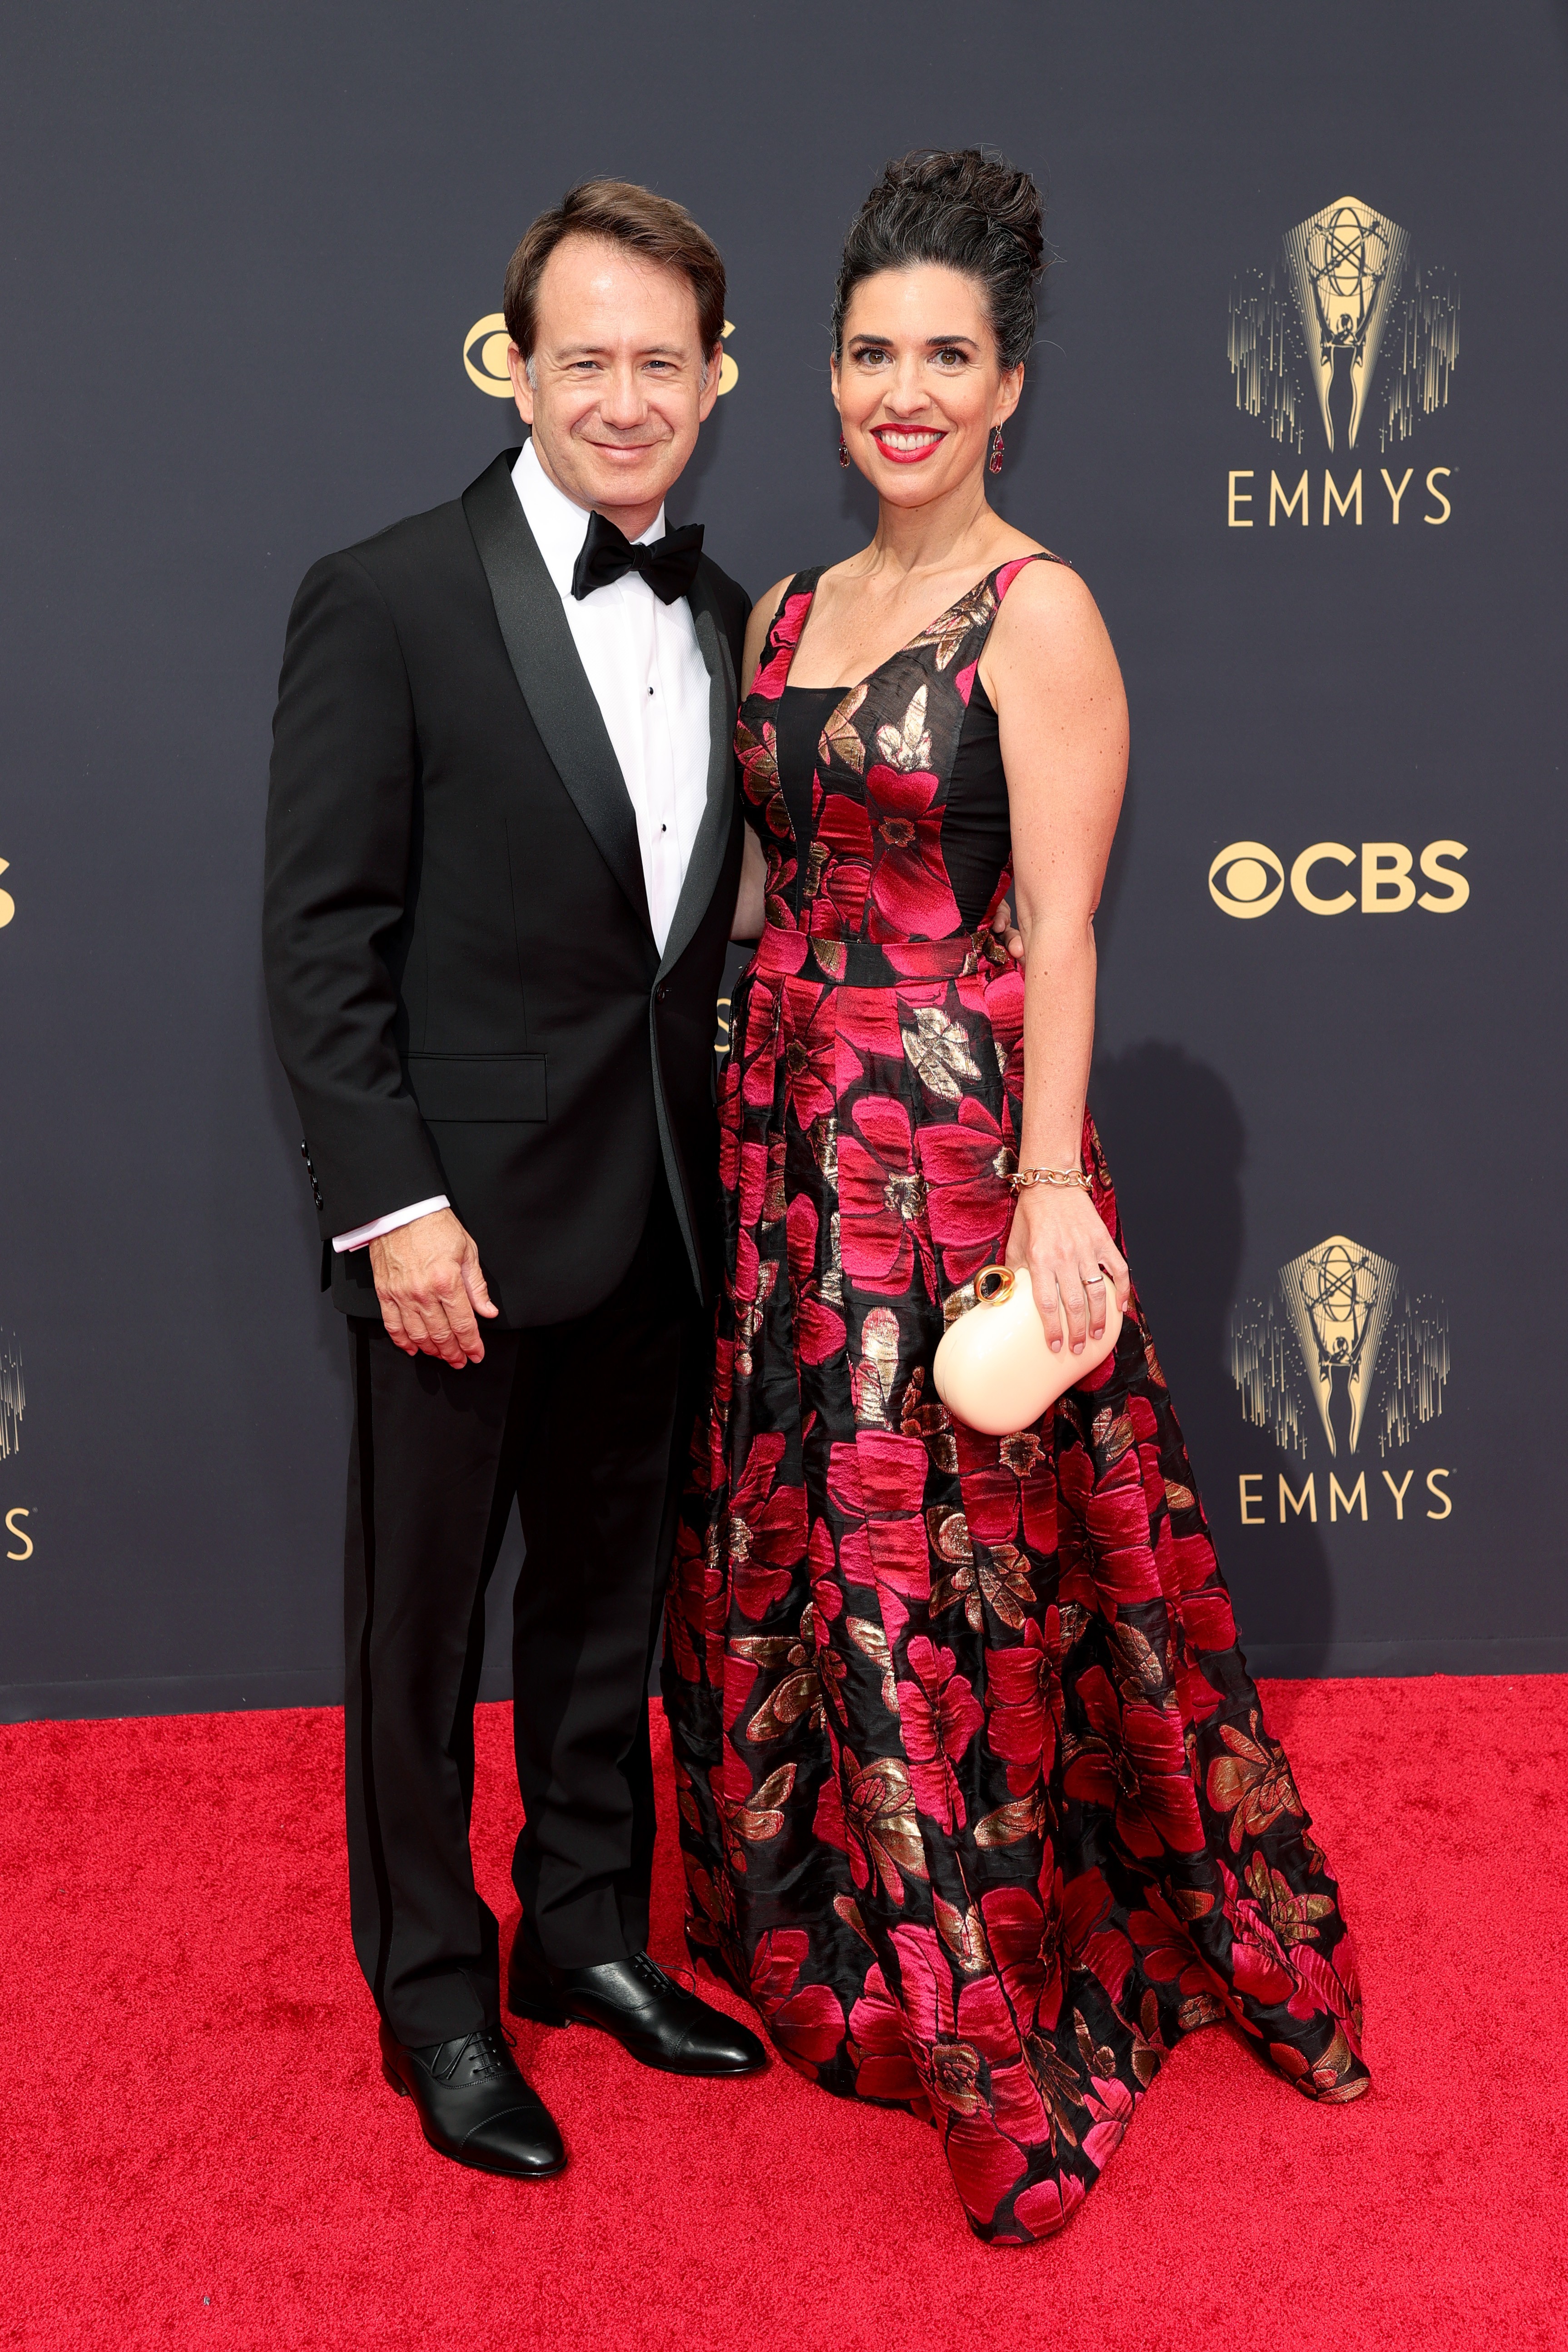 LOS ANGELES, CALIFORNIA - SEPTEMBER 19: (L-R) Jacob Vaughan and Jac Schaeffer attend the 73rd Primetime Emmy Awards at L.A. LIVE on September 19, 2021 in Los Angeles, California. (Photo by Rich Fury/Getty Images) (Foto: Getty Images)